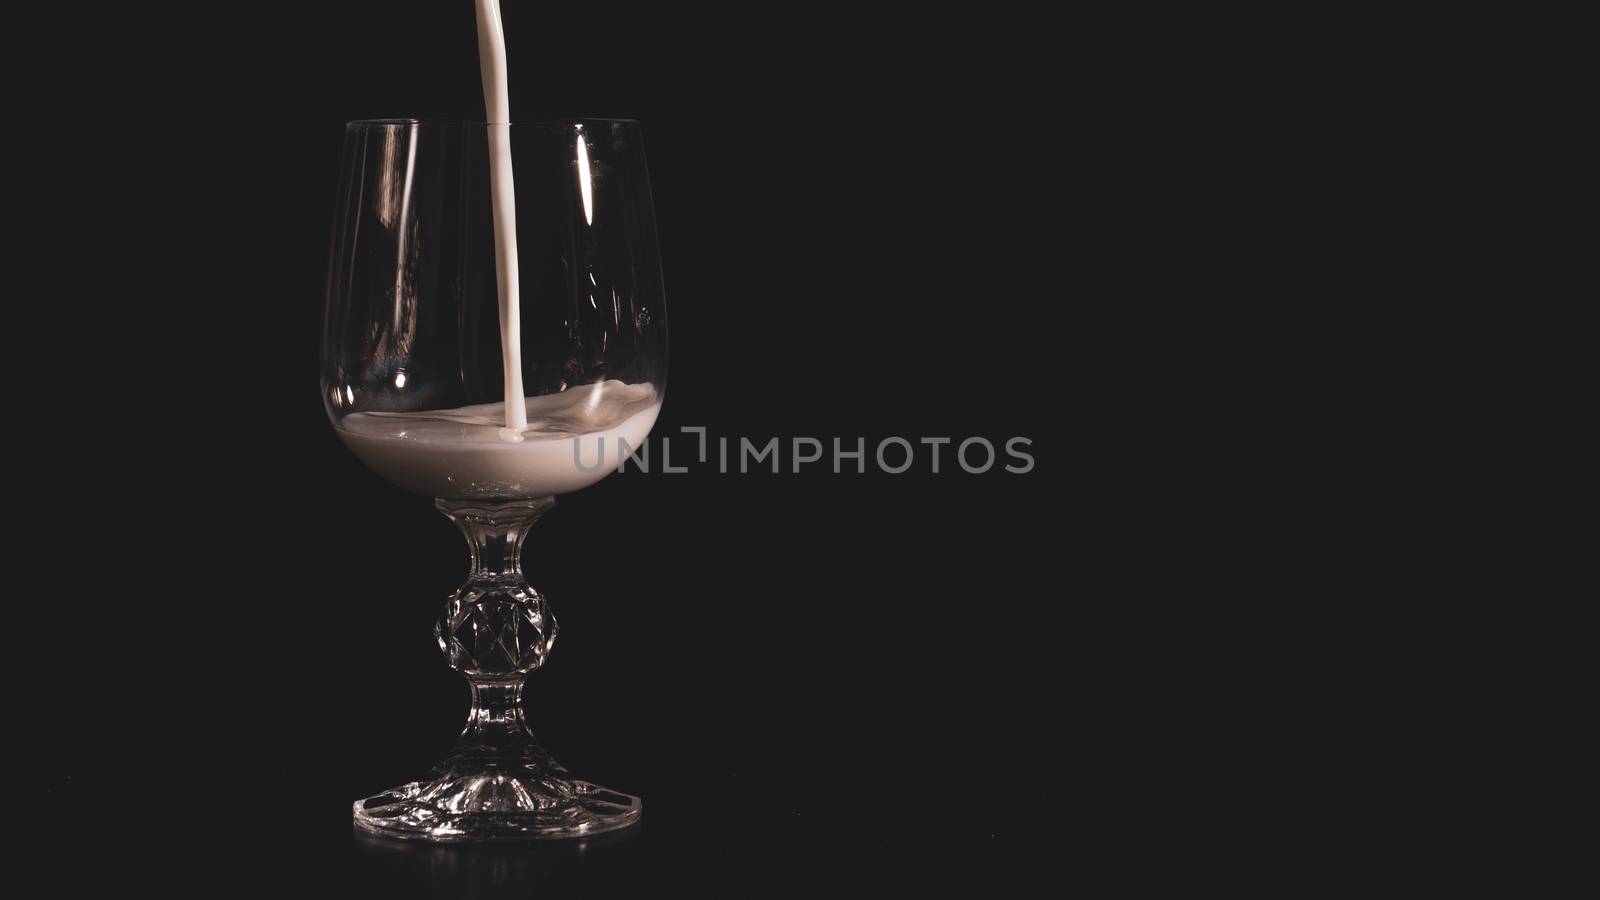 A transparent glass for wine is filled with milk on a black background by marynkin